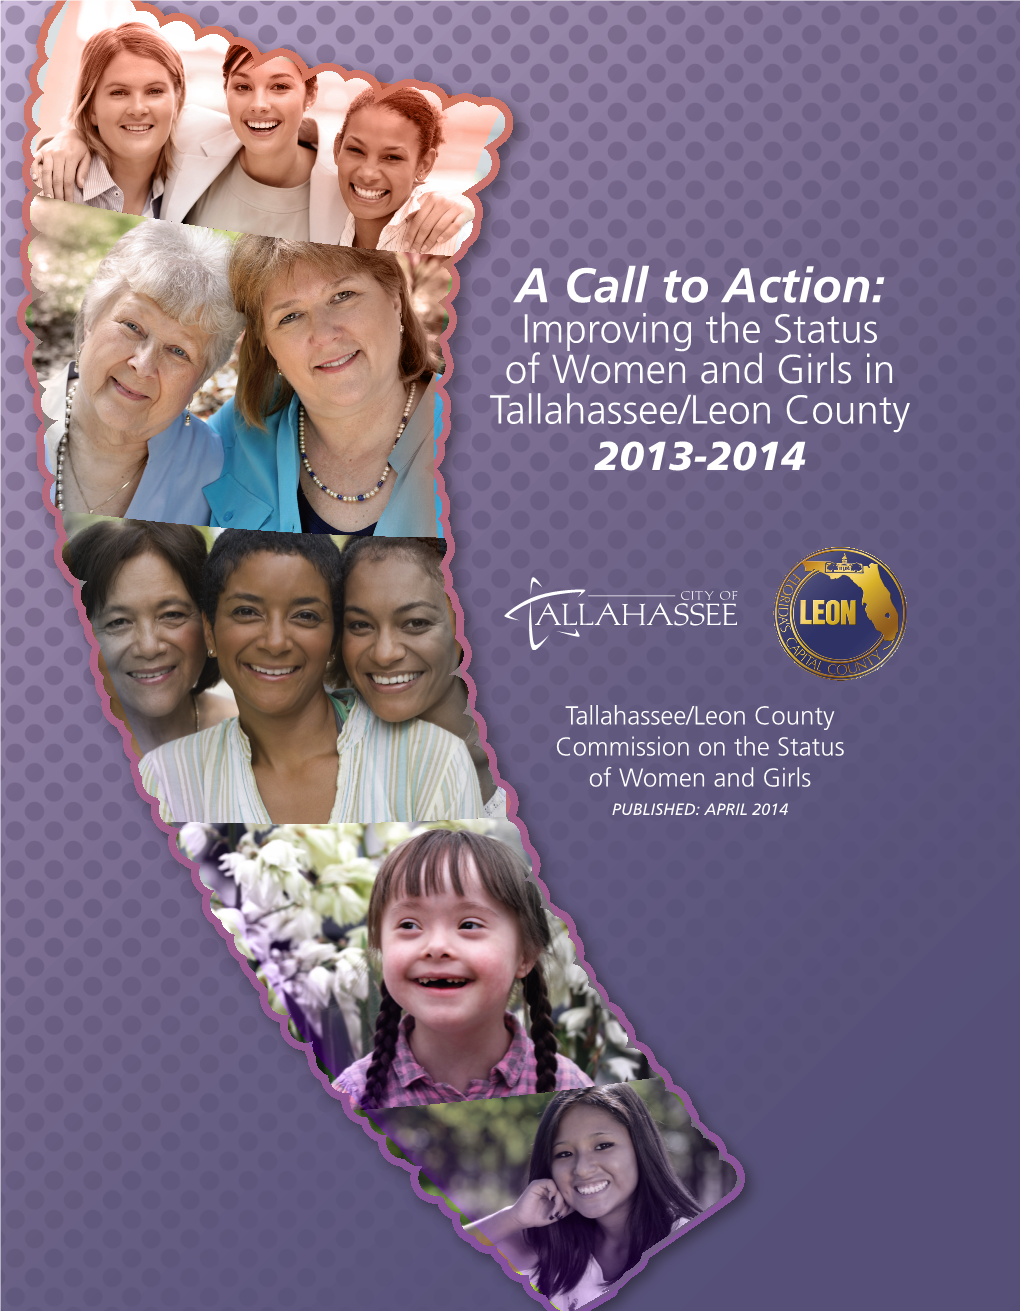 A Call to Action: Improving the Status of Women and Girls in Tallahassee/Leon County 2013-2014